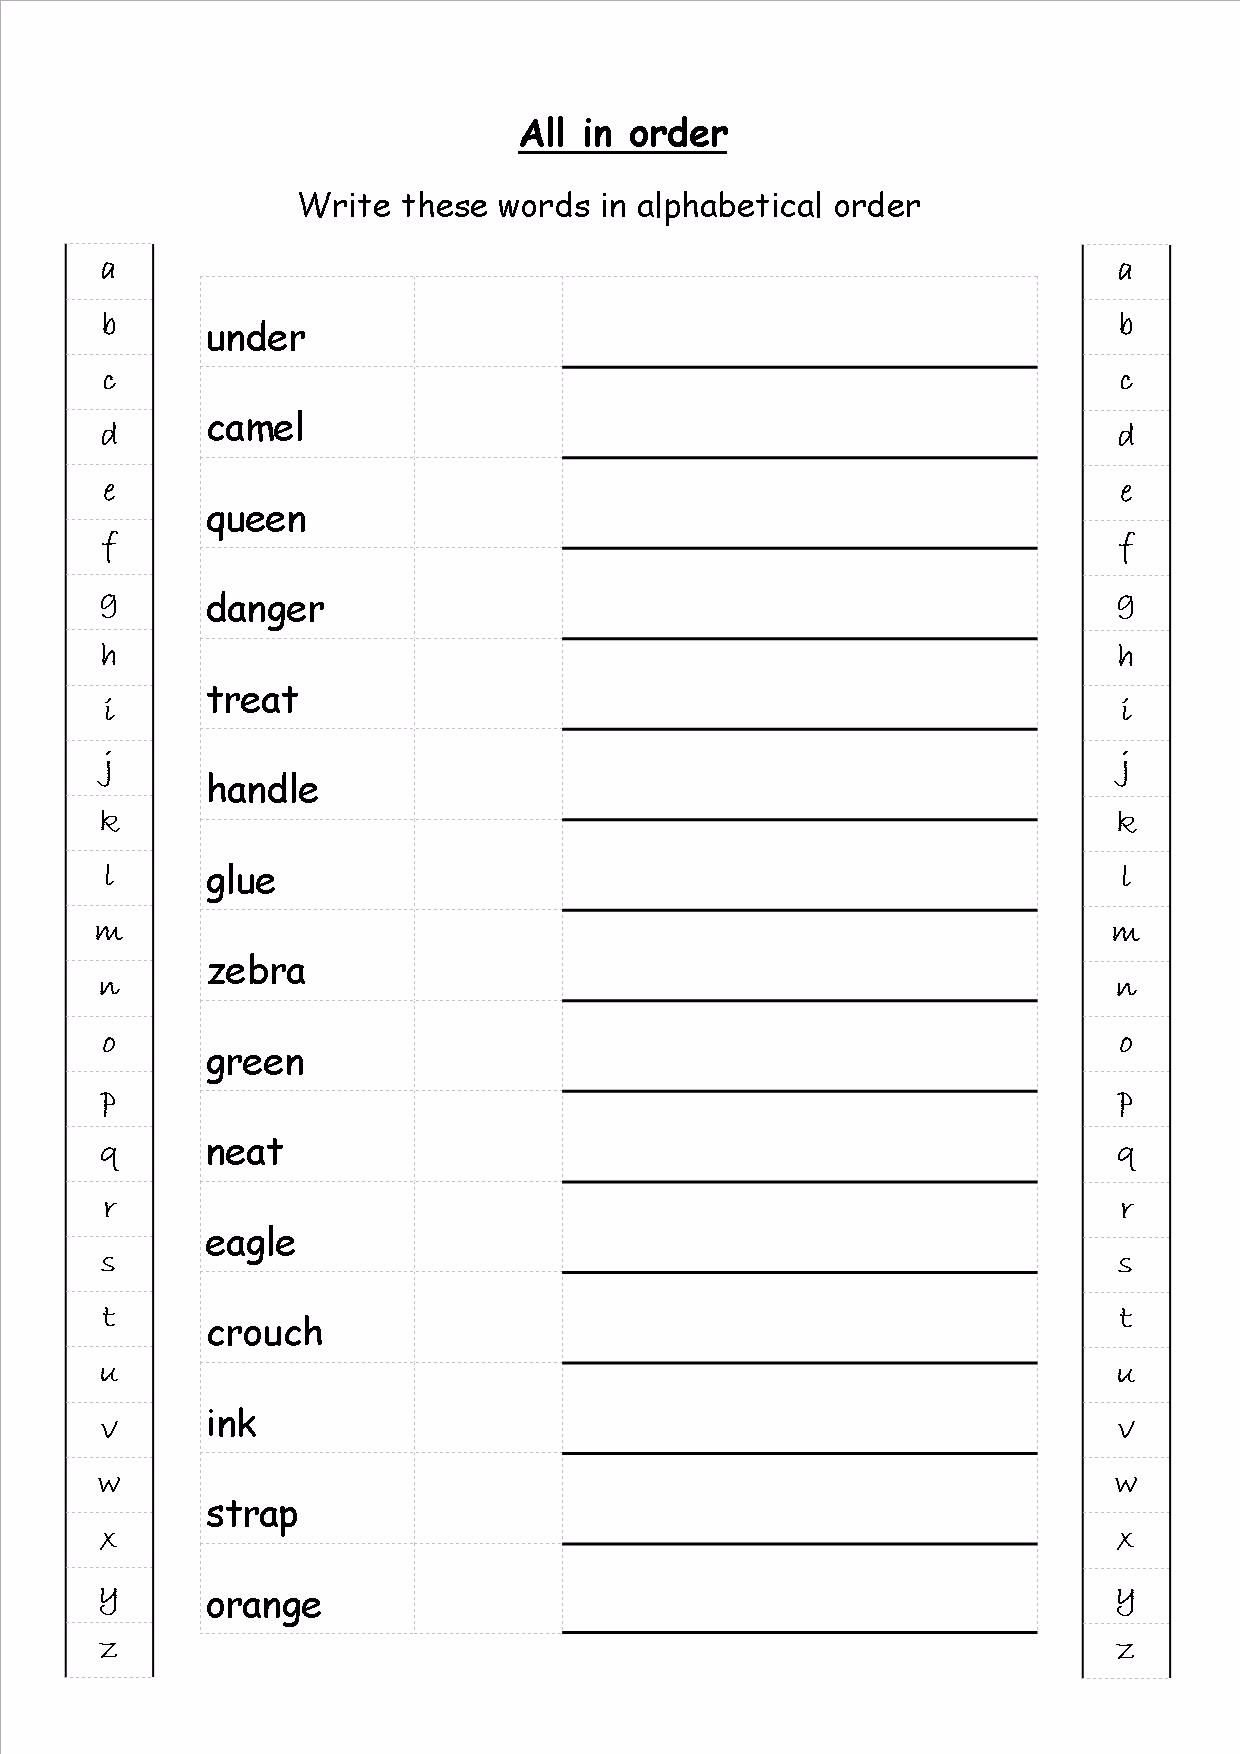 insects-alphabetical-order-worksheet-have-fun-teaching-alphabetical